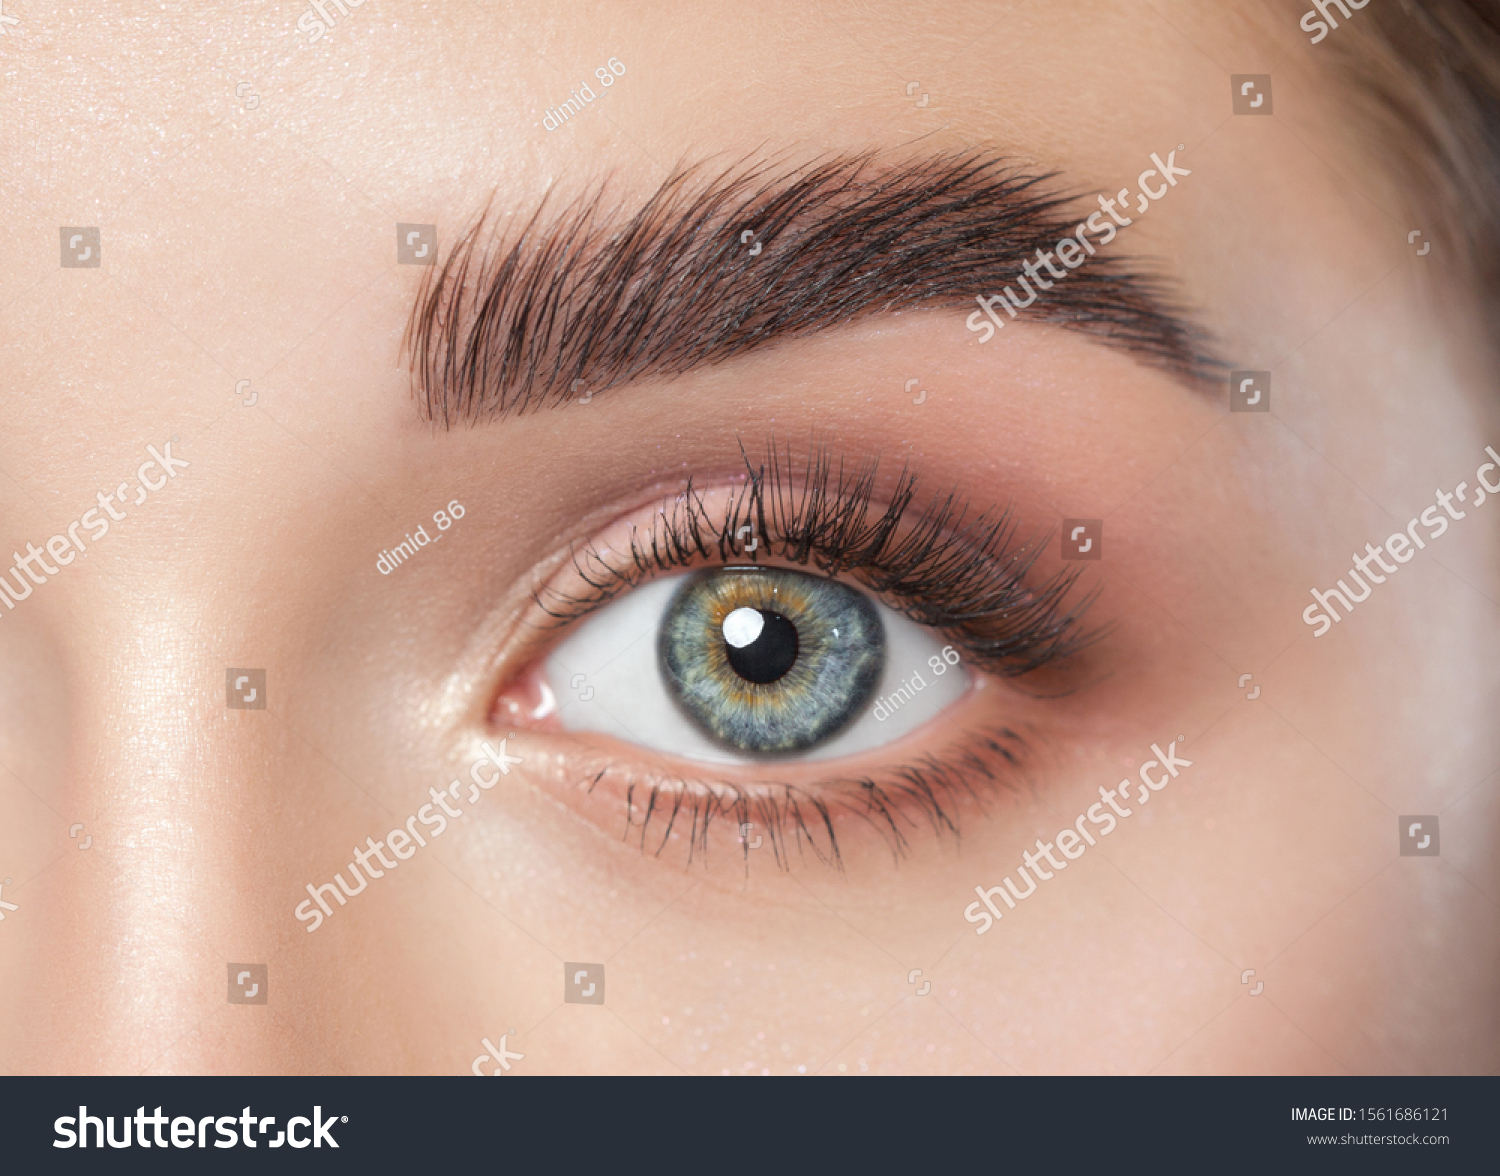 Beautiful woman with long eyelashes, beautiful make-up and thick eyebrows. Beautiful blue eyes close up. Looking at the camera. Makeup and Cosmetology concept. #1561686121